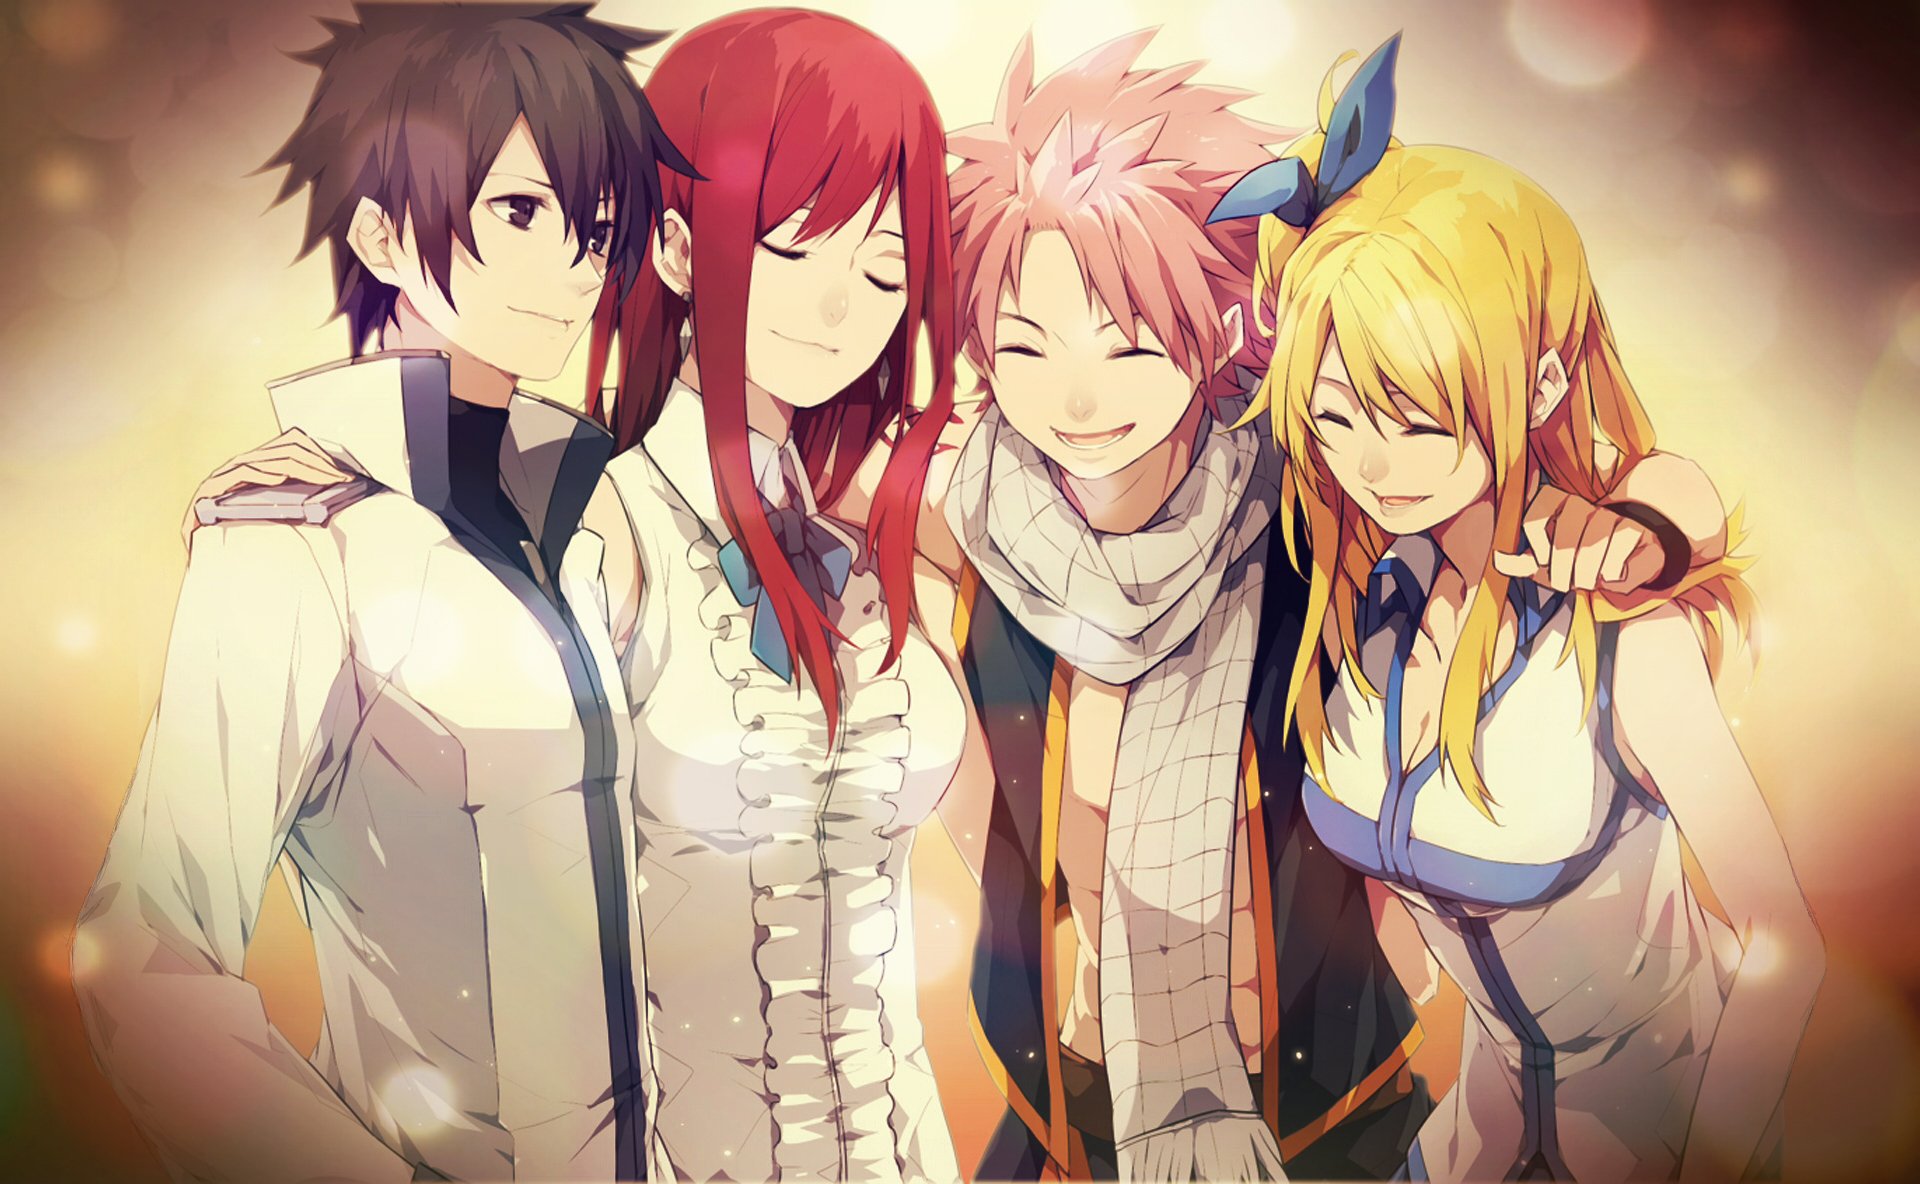 anime, Tale, Of, Fairy, Tail, Group, Girl, Boy, Friend, Series Wallpaper